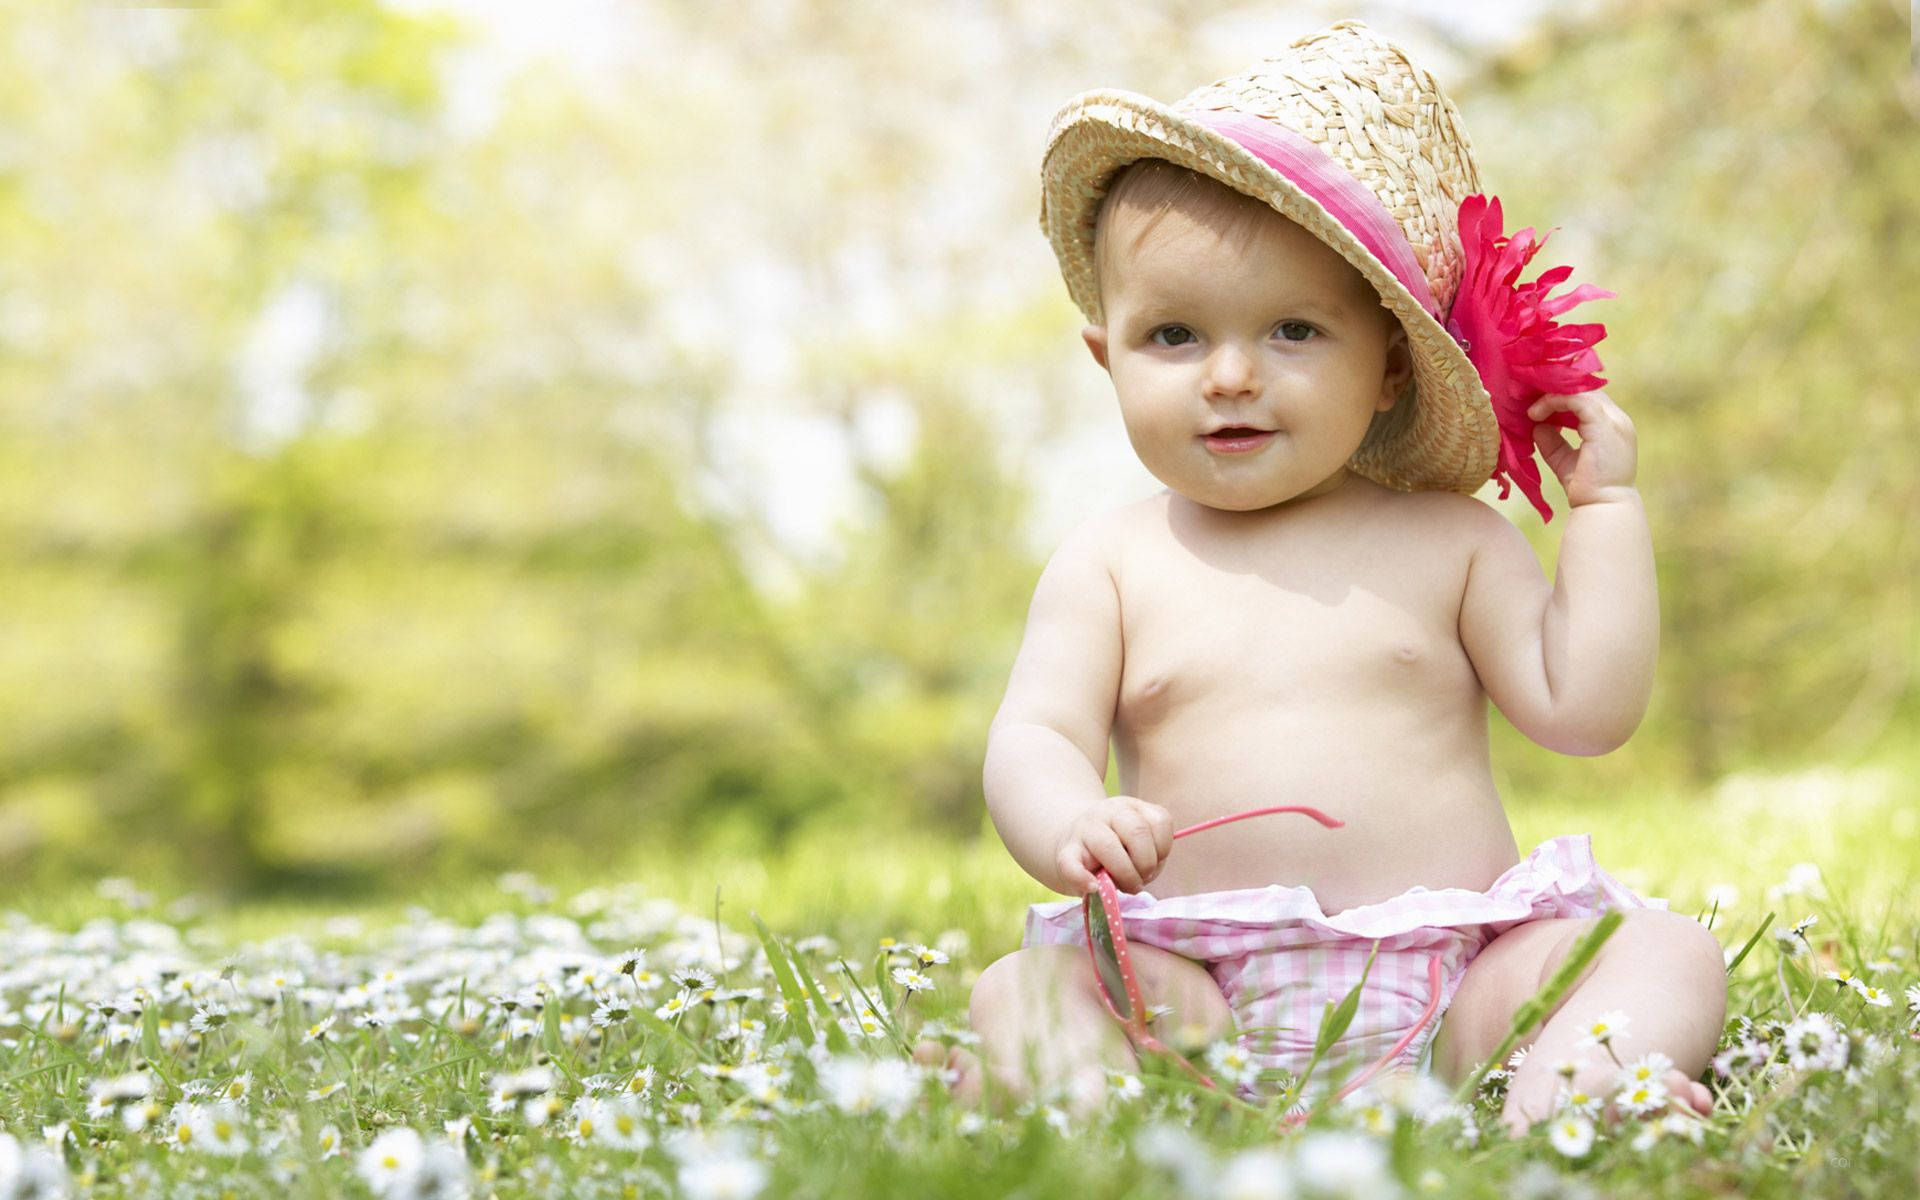 A beautiful baby boy enjoying the summertime in a white daisy-filled field. Wallpaper